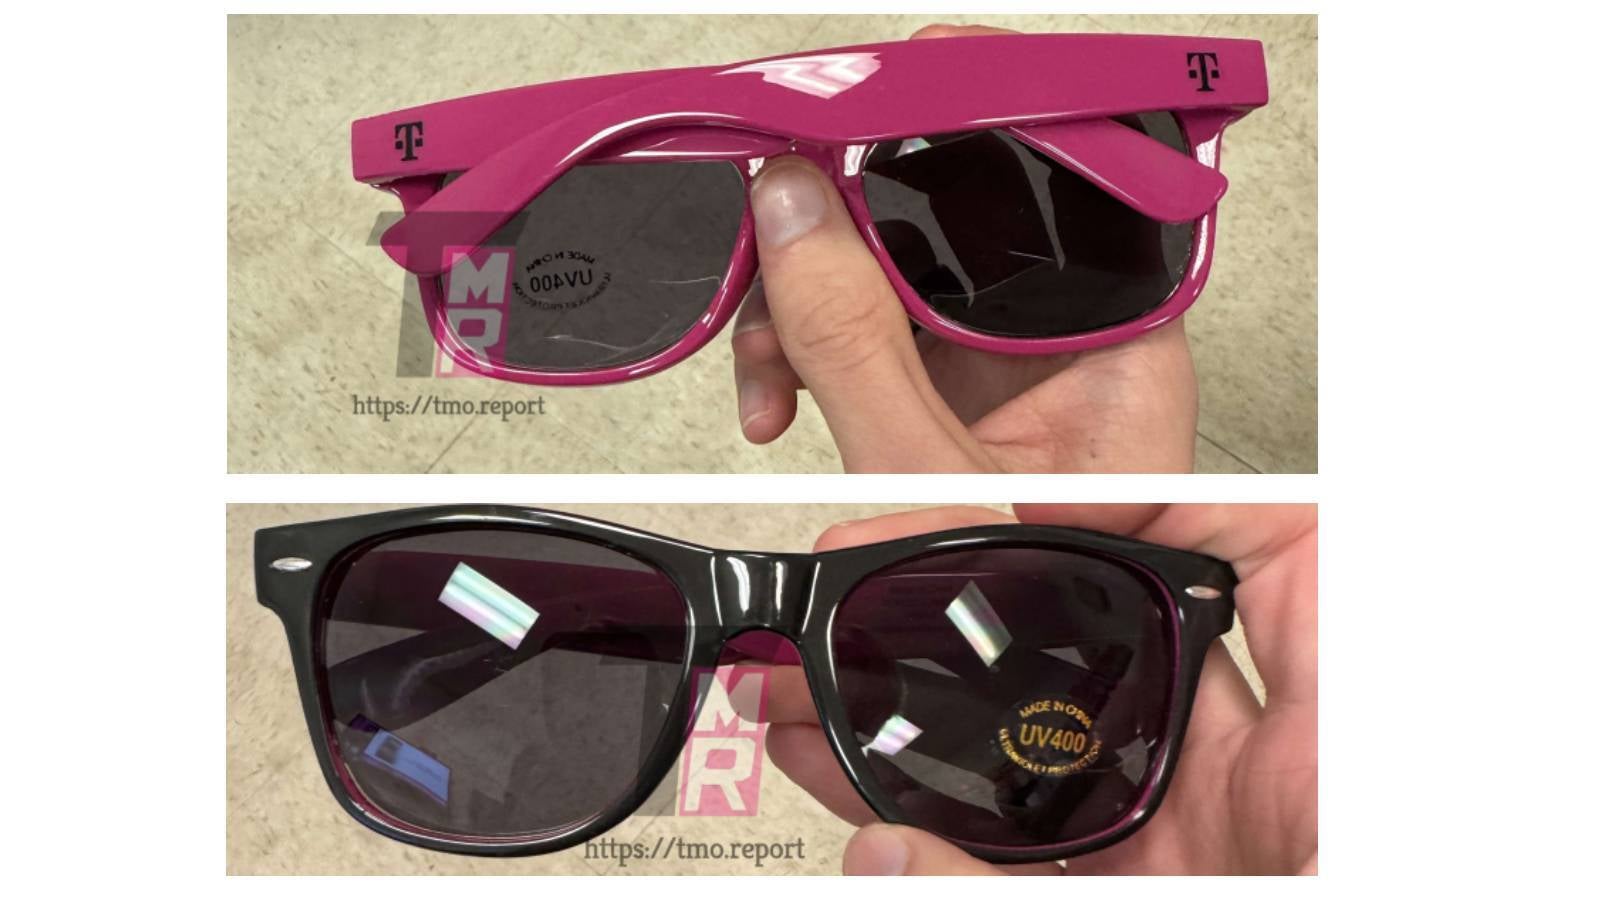 Leaked picture of the sunglasses T-Mobile will send to its customers - A new T-Mobile freebie is headed your way soon -- be sure to claim it on time